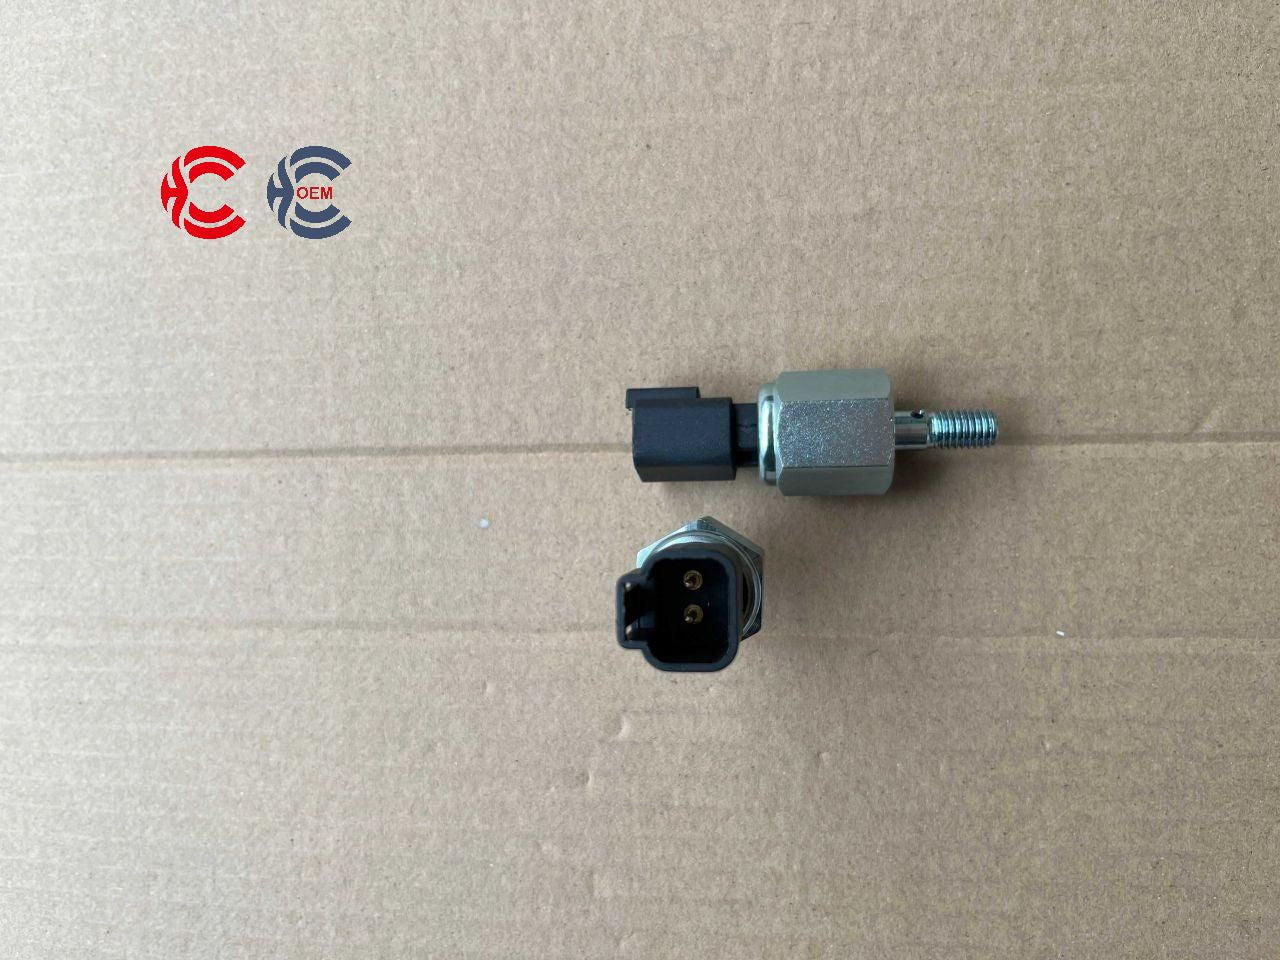 OEM: T421762Material: ABS MetalColor: GoldenOrigin: Made in ChinaWeight: 100gPacking List: 1* Pressure Sensor More ServiceWe can provide OEM Manufacturing serviceWe can Be your one-step solution for Auto PartsWe can provide technical scheme for you Feel Free to Contact Us, We will get back to you as soon as possible.